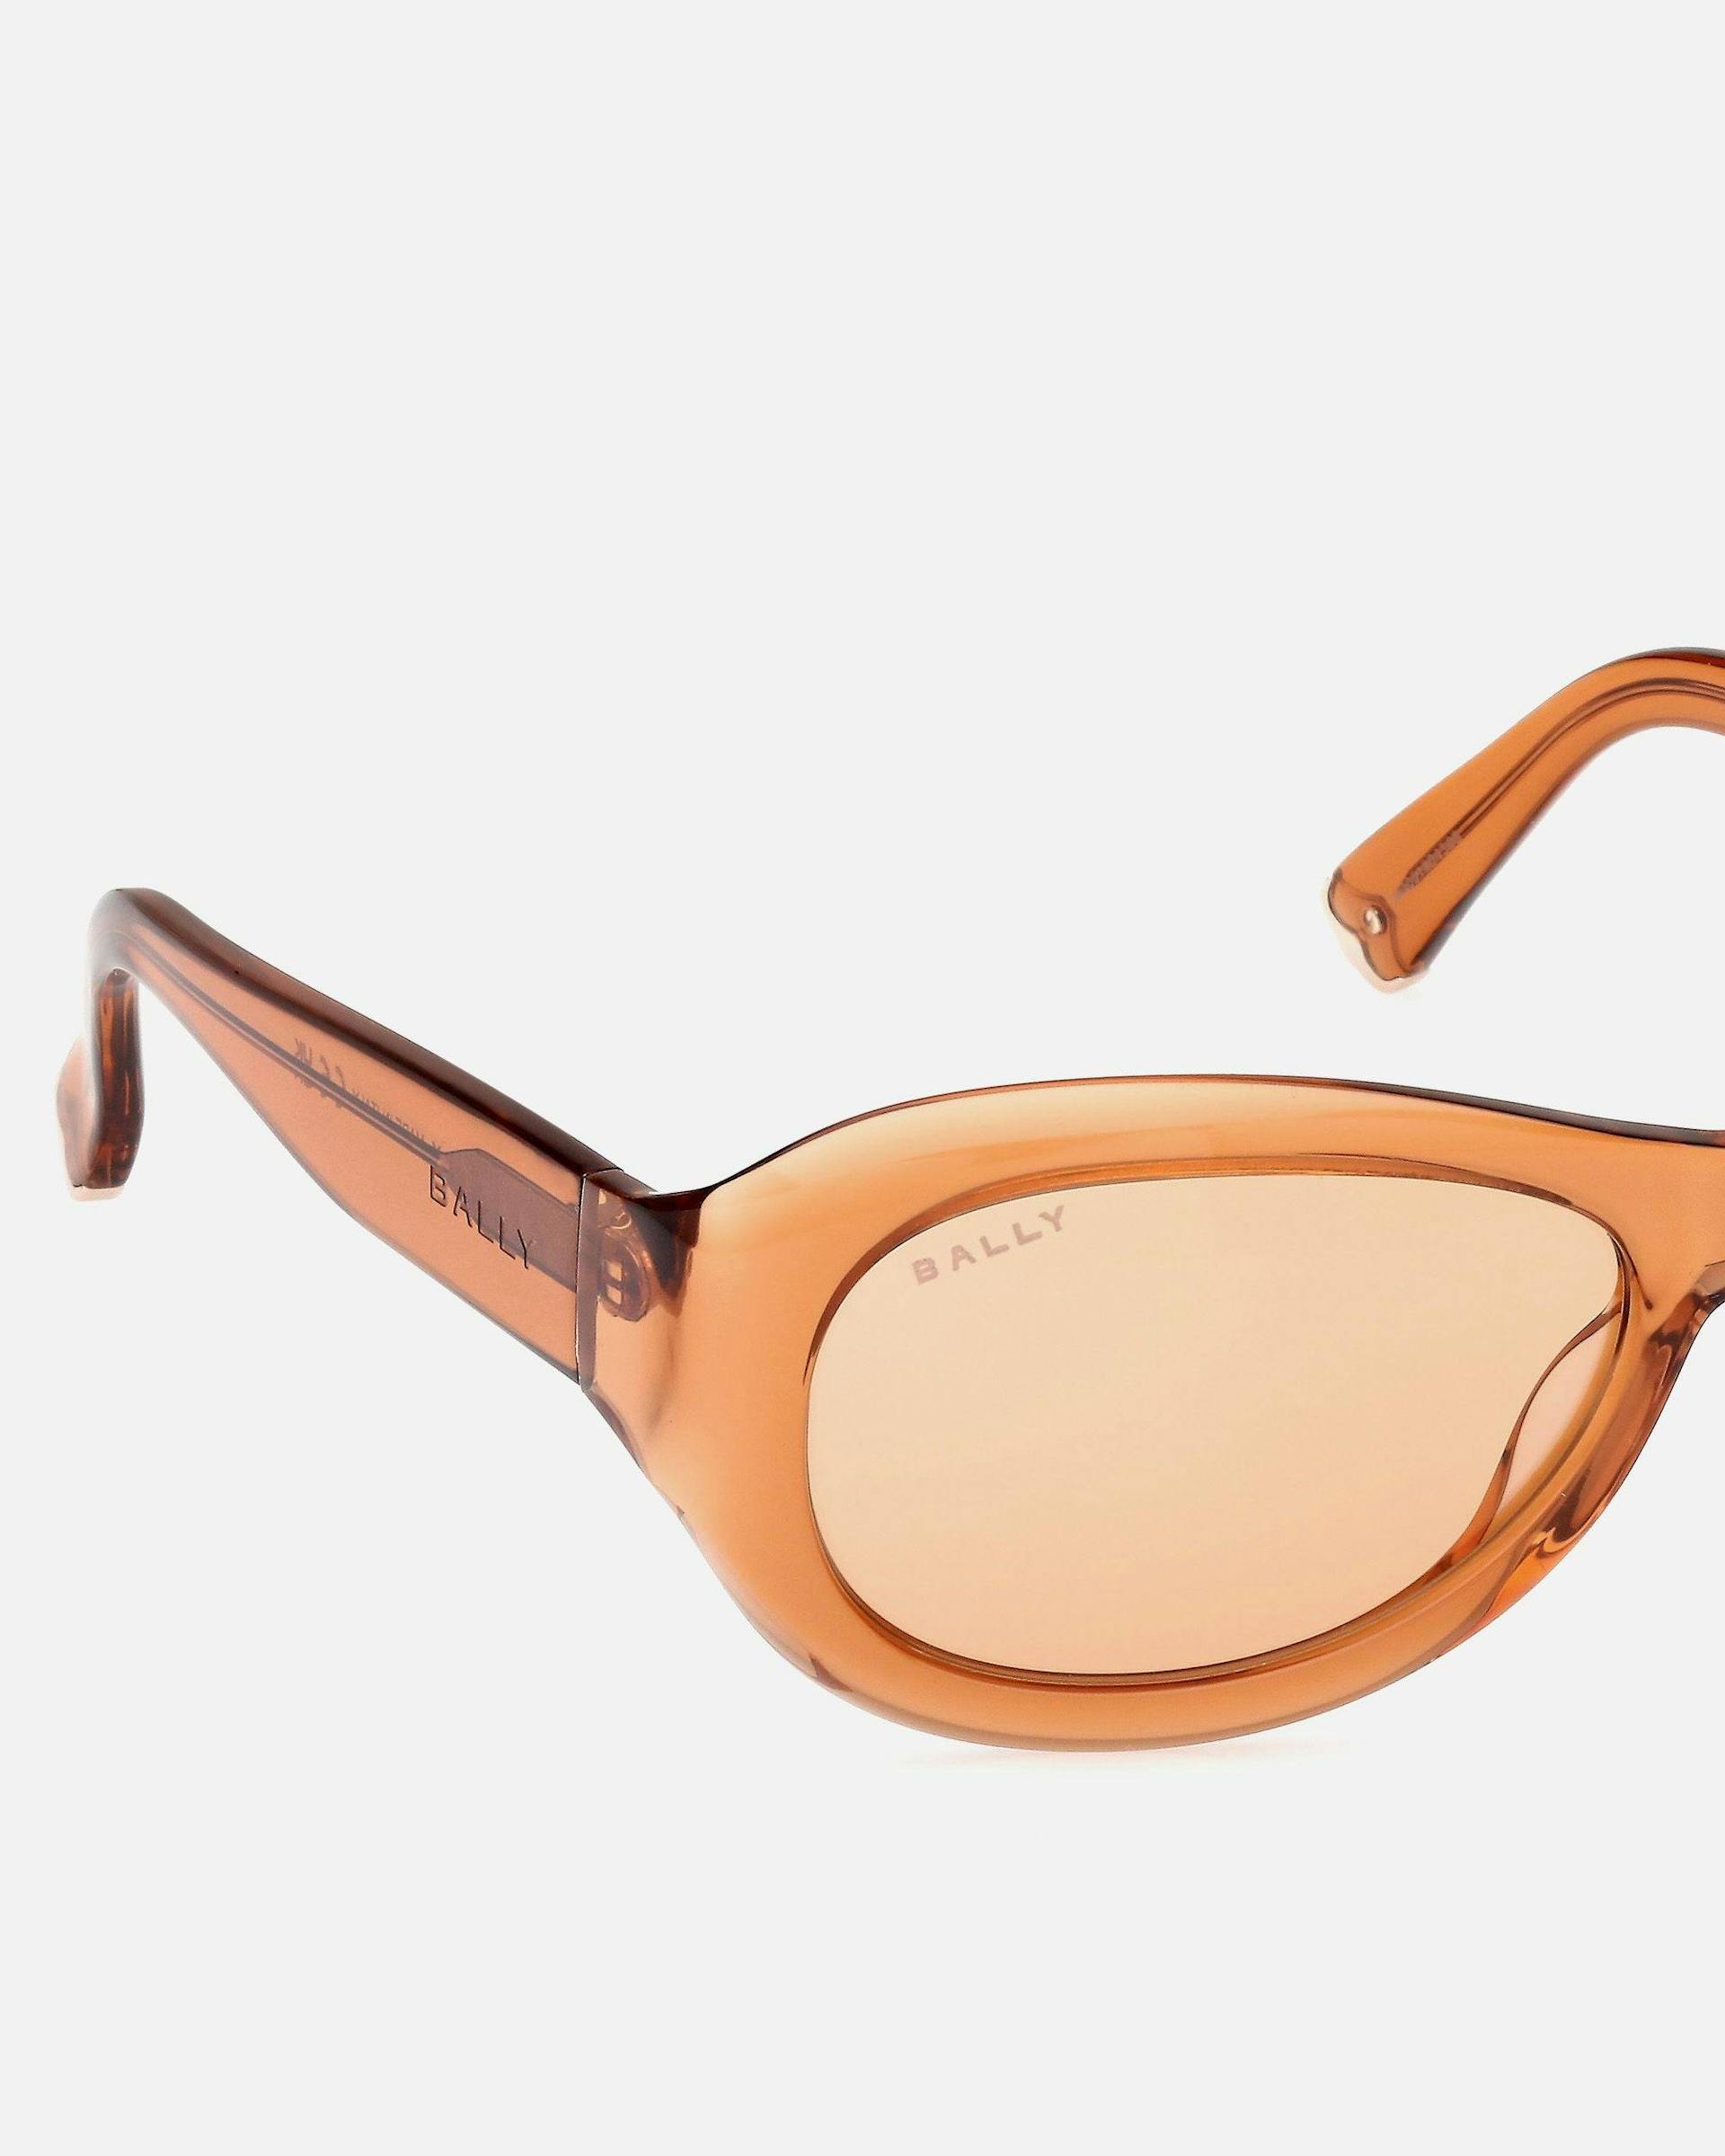 Maurice Acetate Sunglasses in Amber and Orange | Bally | Still Life Detail